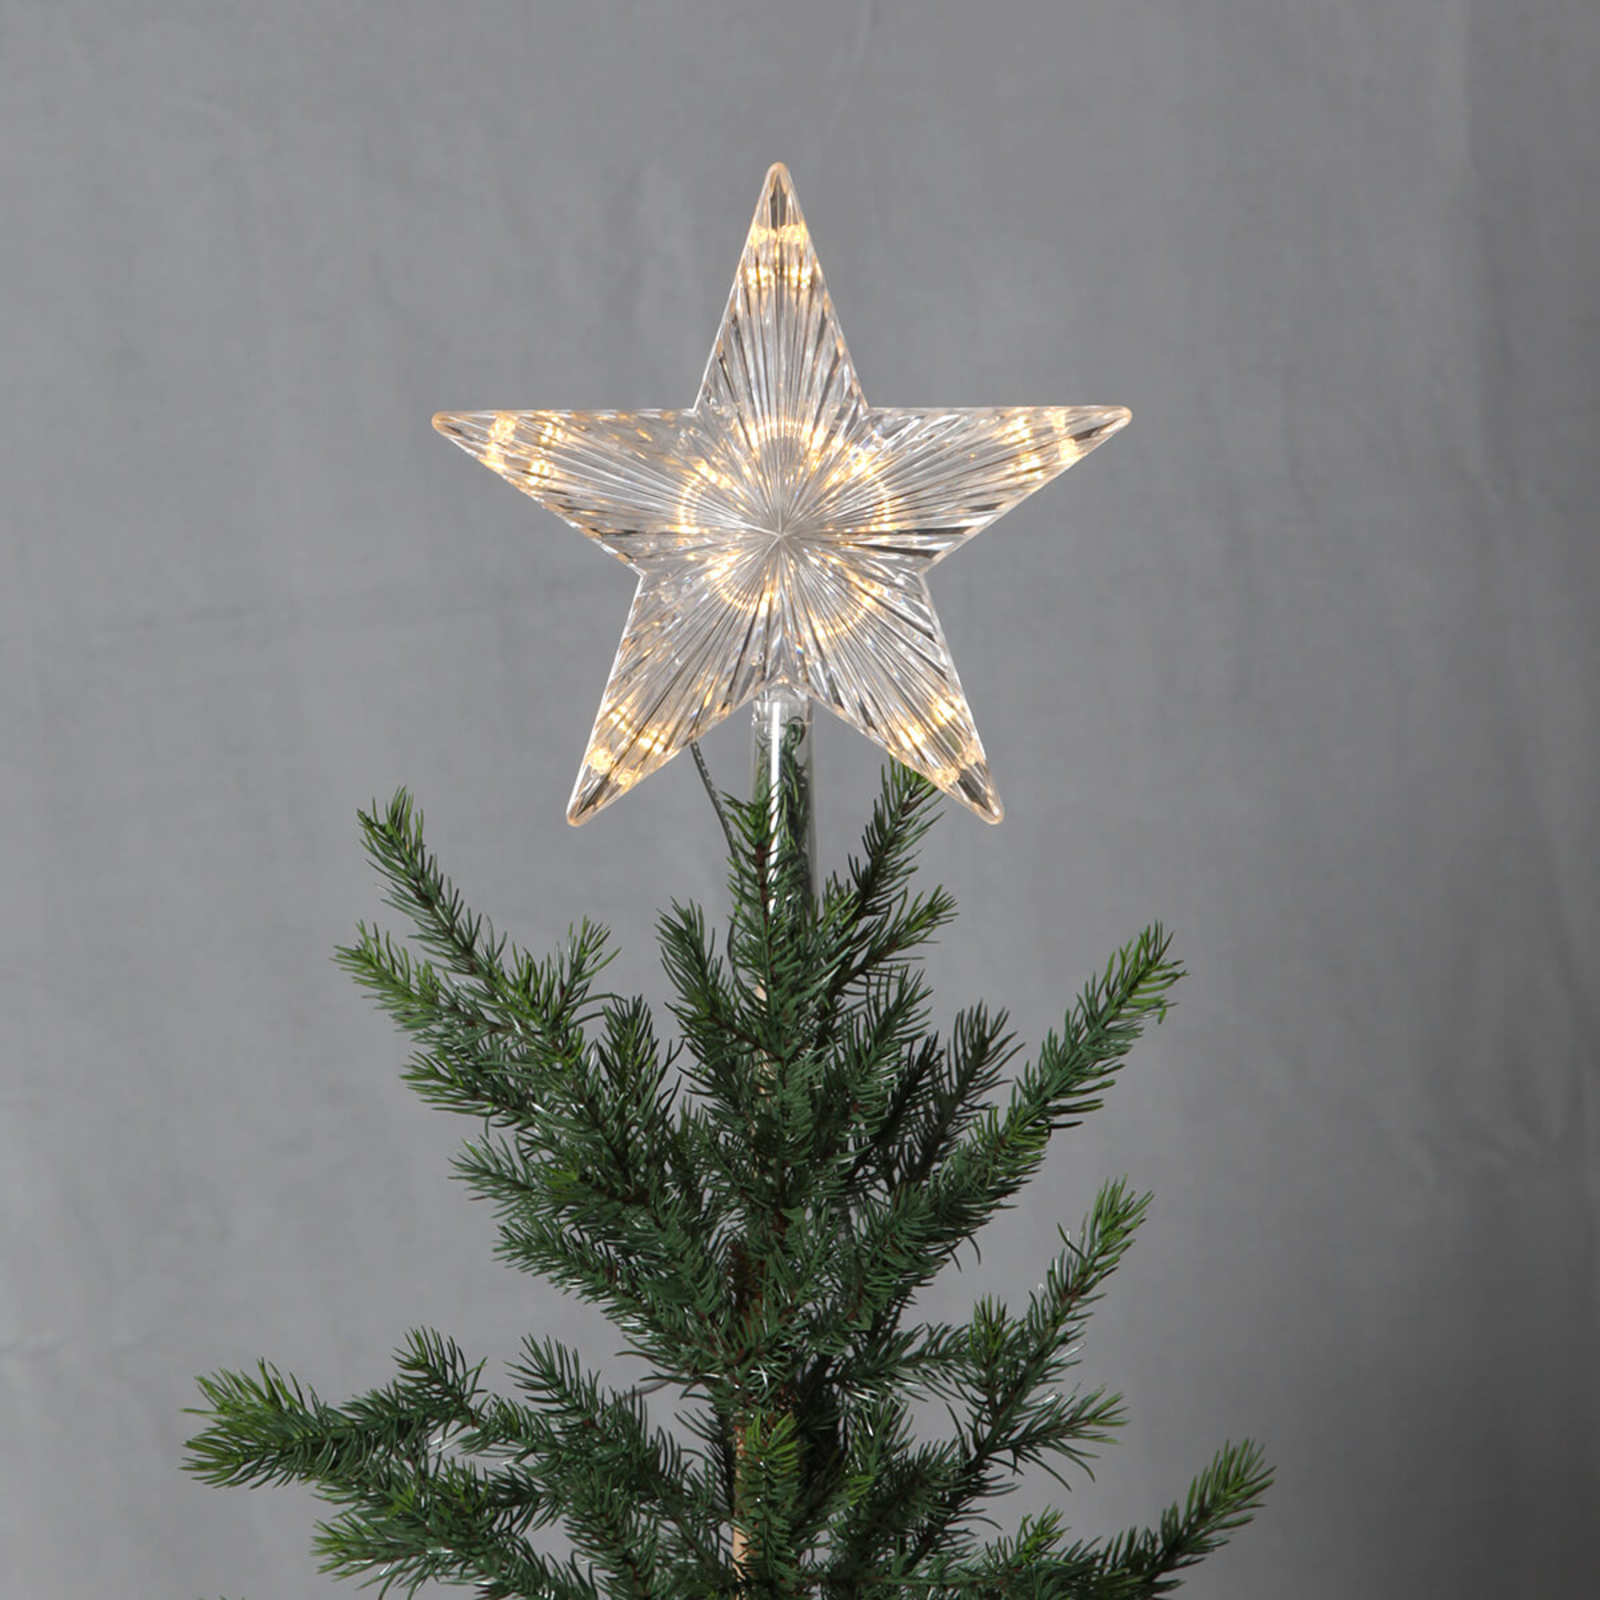 LED treetop Topsy with a plastic star